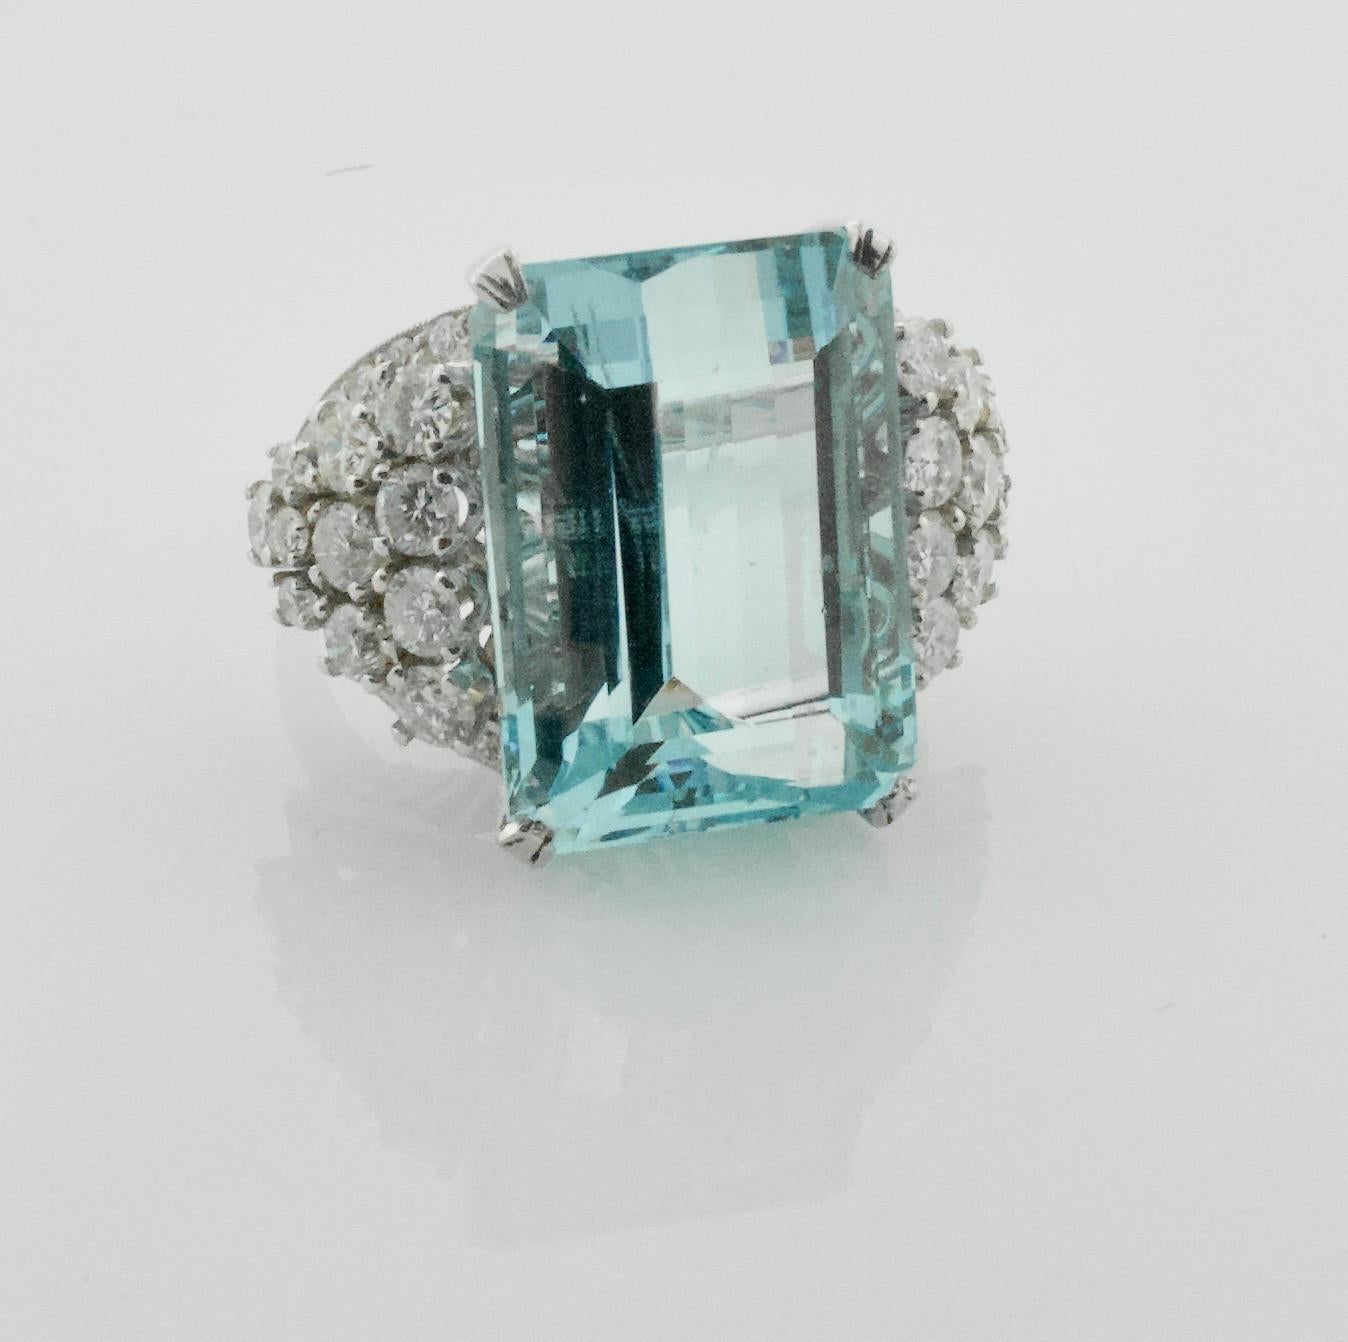 Aquamarine and Diamond Platinum Ring 20.00 carats 
One Emerald Cut Cut Aquamarine weighing 20.00 carats [19.3 x 14.00 x 10.05] approximately [bright with no imperfections visible to the naked eye]
Forty Five Round Brilliant Cut Diamonds weighing